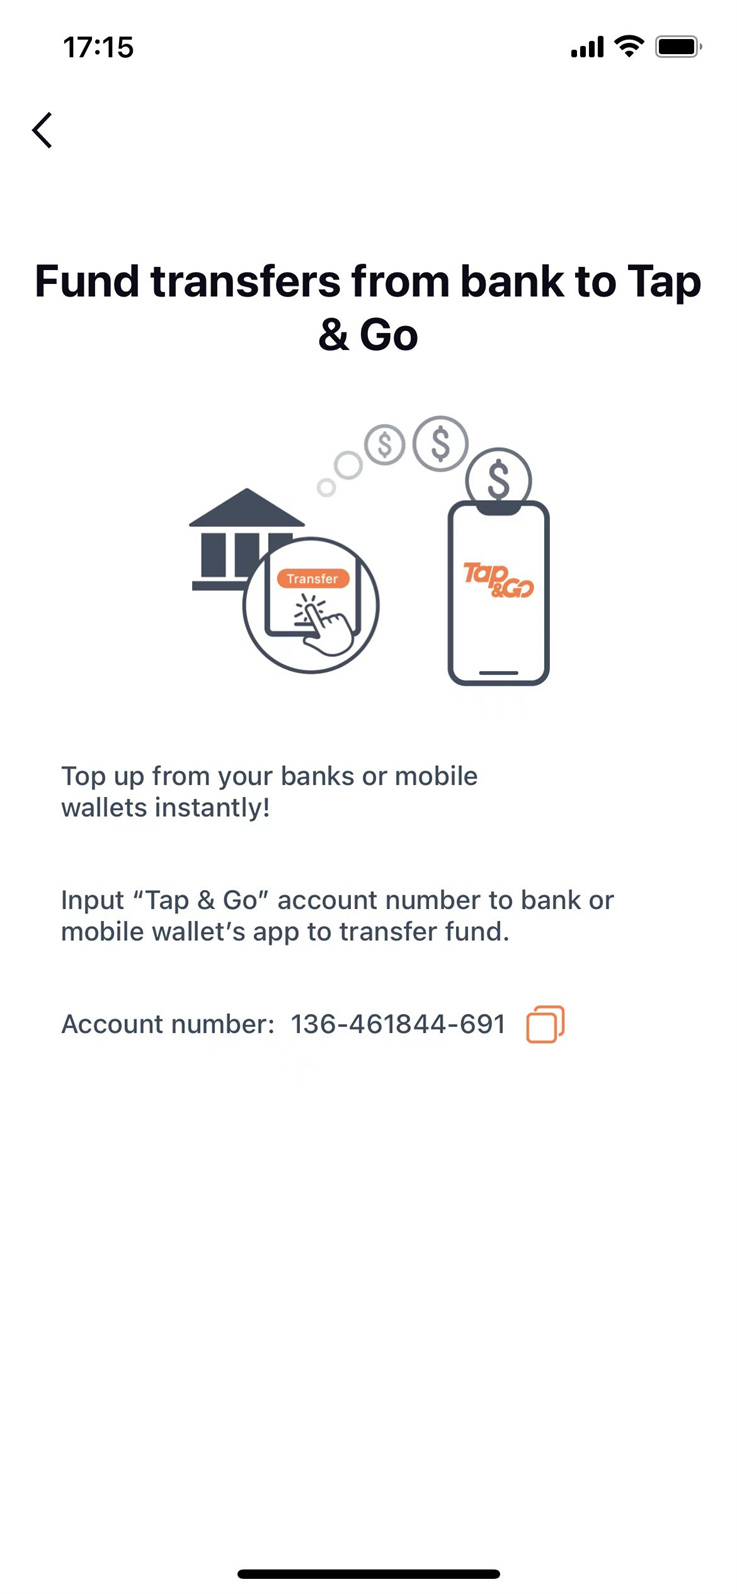 【Hong Kong remittance】Tap&GO Account Number query tutorial